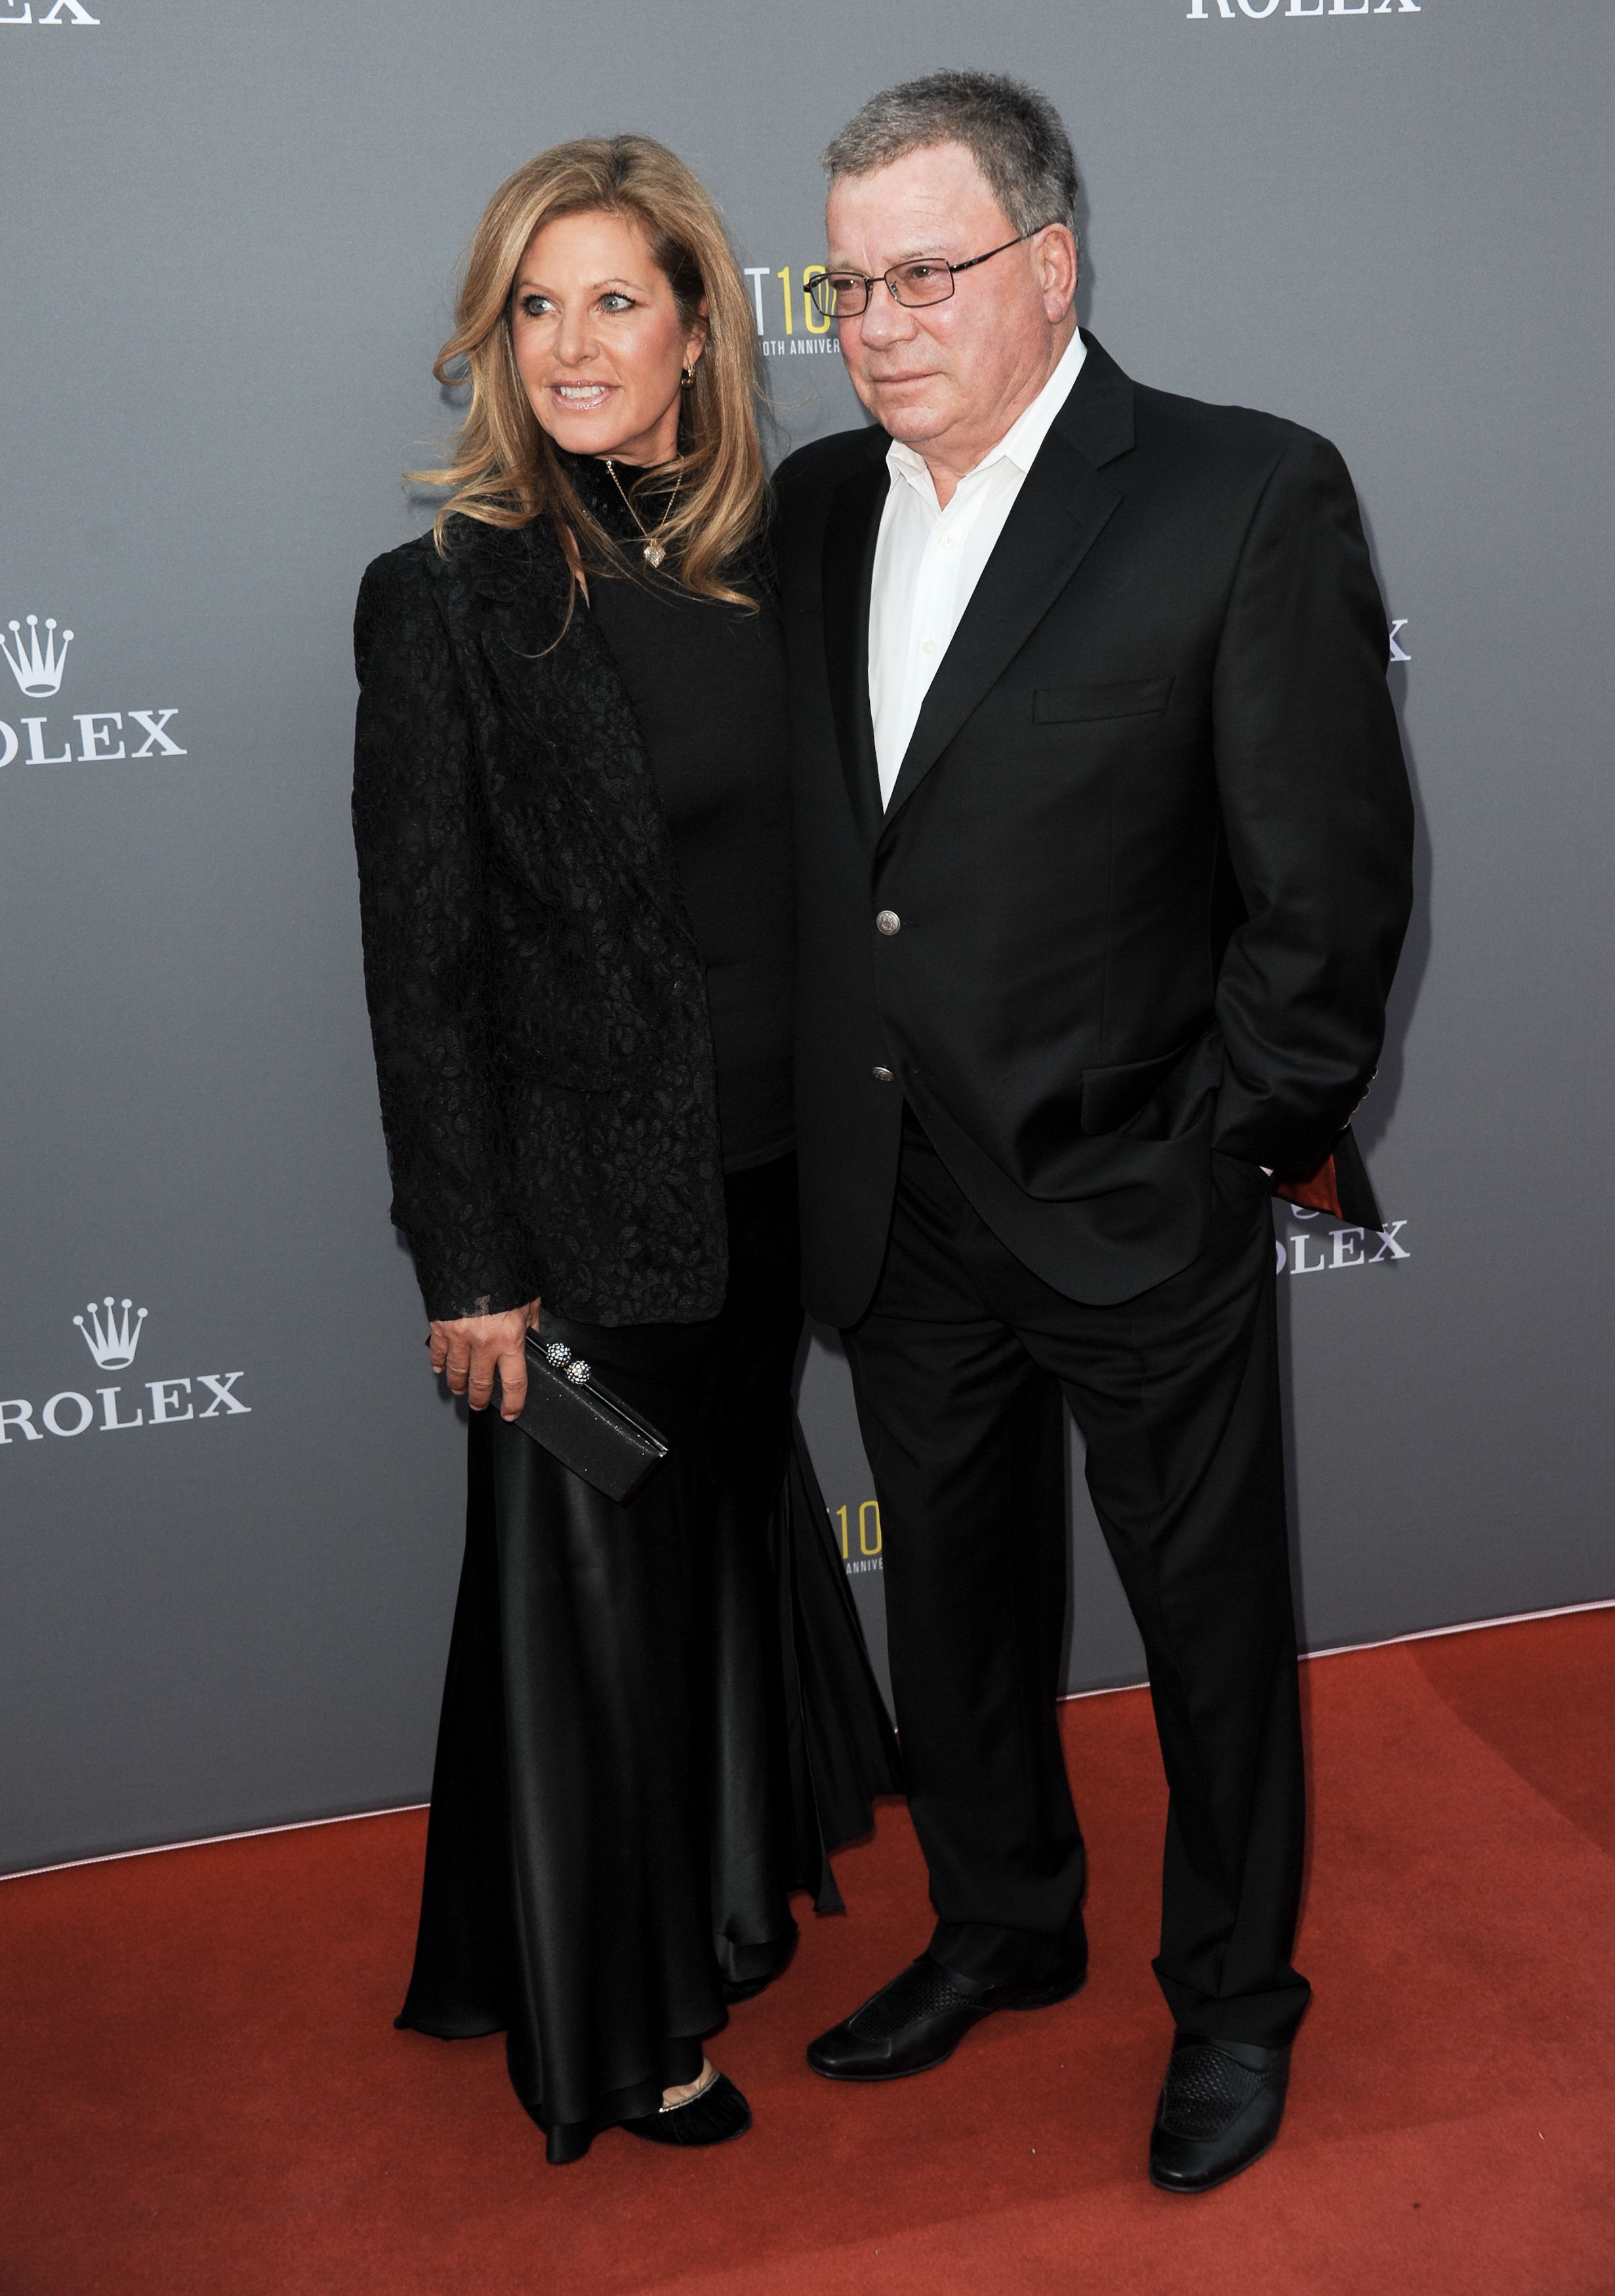 William Shatner Files for Divorce From Wife Elizabeth After 18 Years